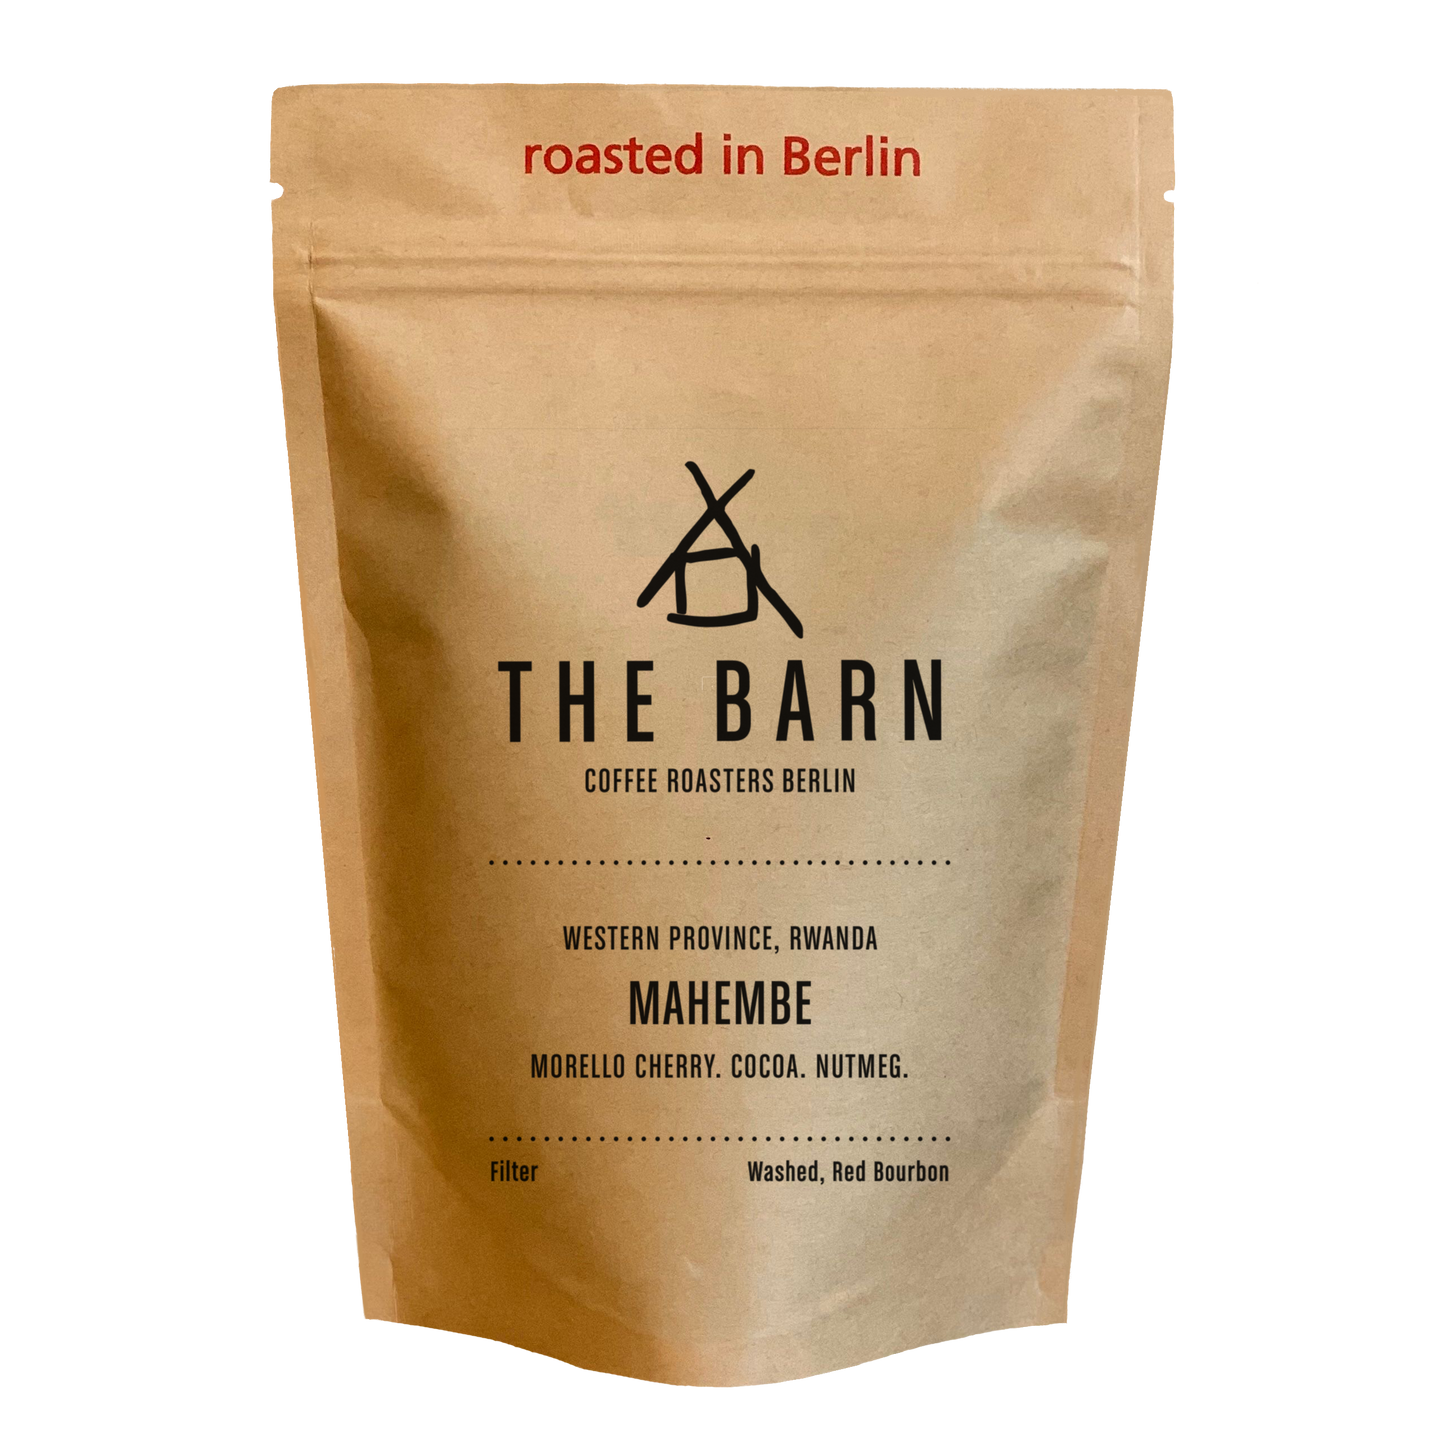 250 grams brown bag of Mahembe, filter coffee beans, with a red tag printed on top "roasted in Berlin"